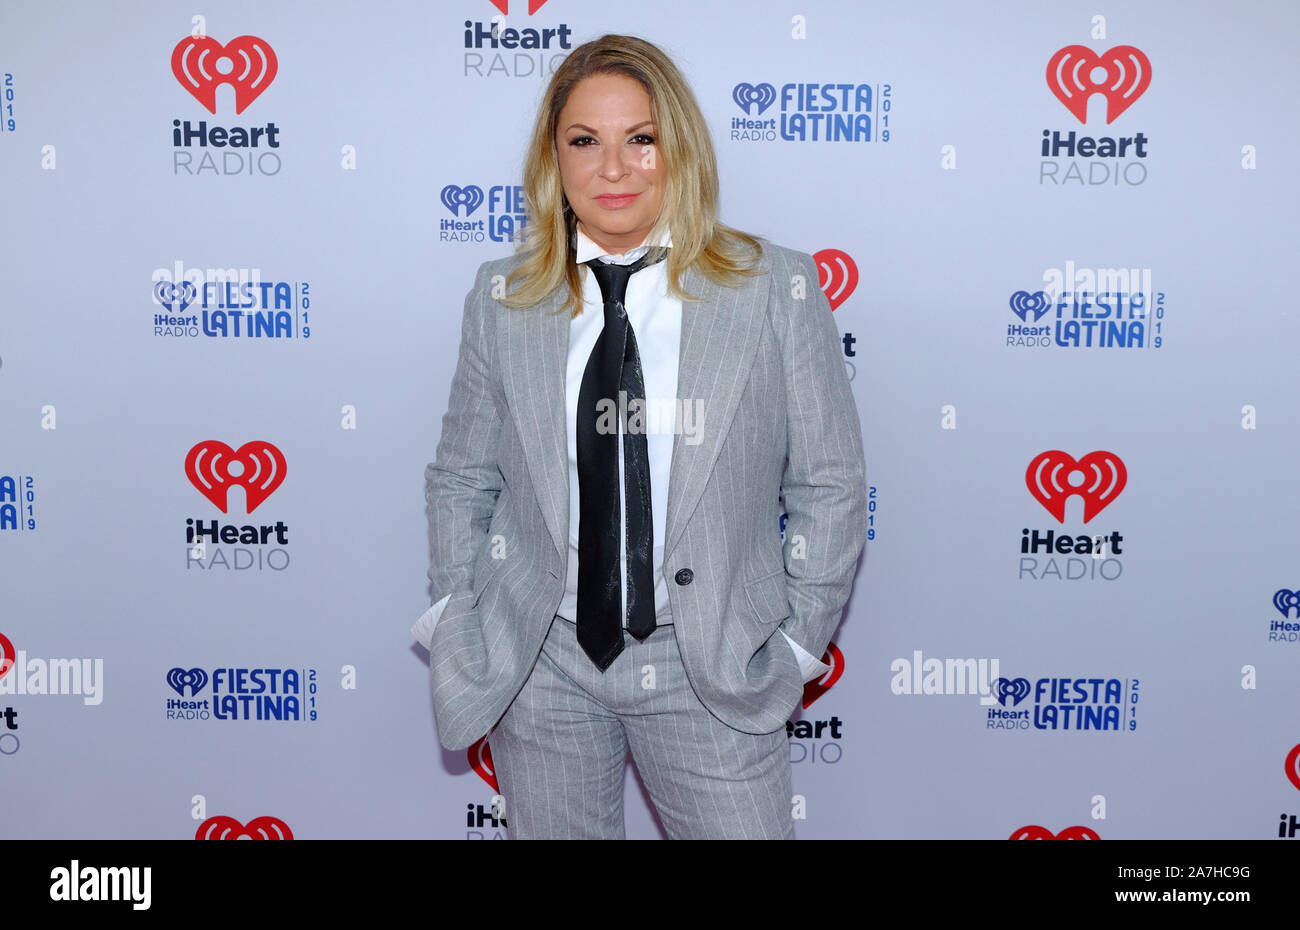 Miami, United States. 02nd Nov, 2019. Ana Maria Polo walks the red carpet at the iHeartRadio 2019 Fiesta Latina concert at the American Airlines Arena, in Miami, Florida, on Saturday, November 2, 2019. Photo by Gary I Rothstein/UPI Credit: UPI/Alamy Live News Stock Photo